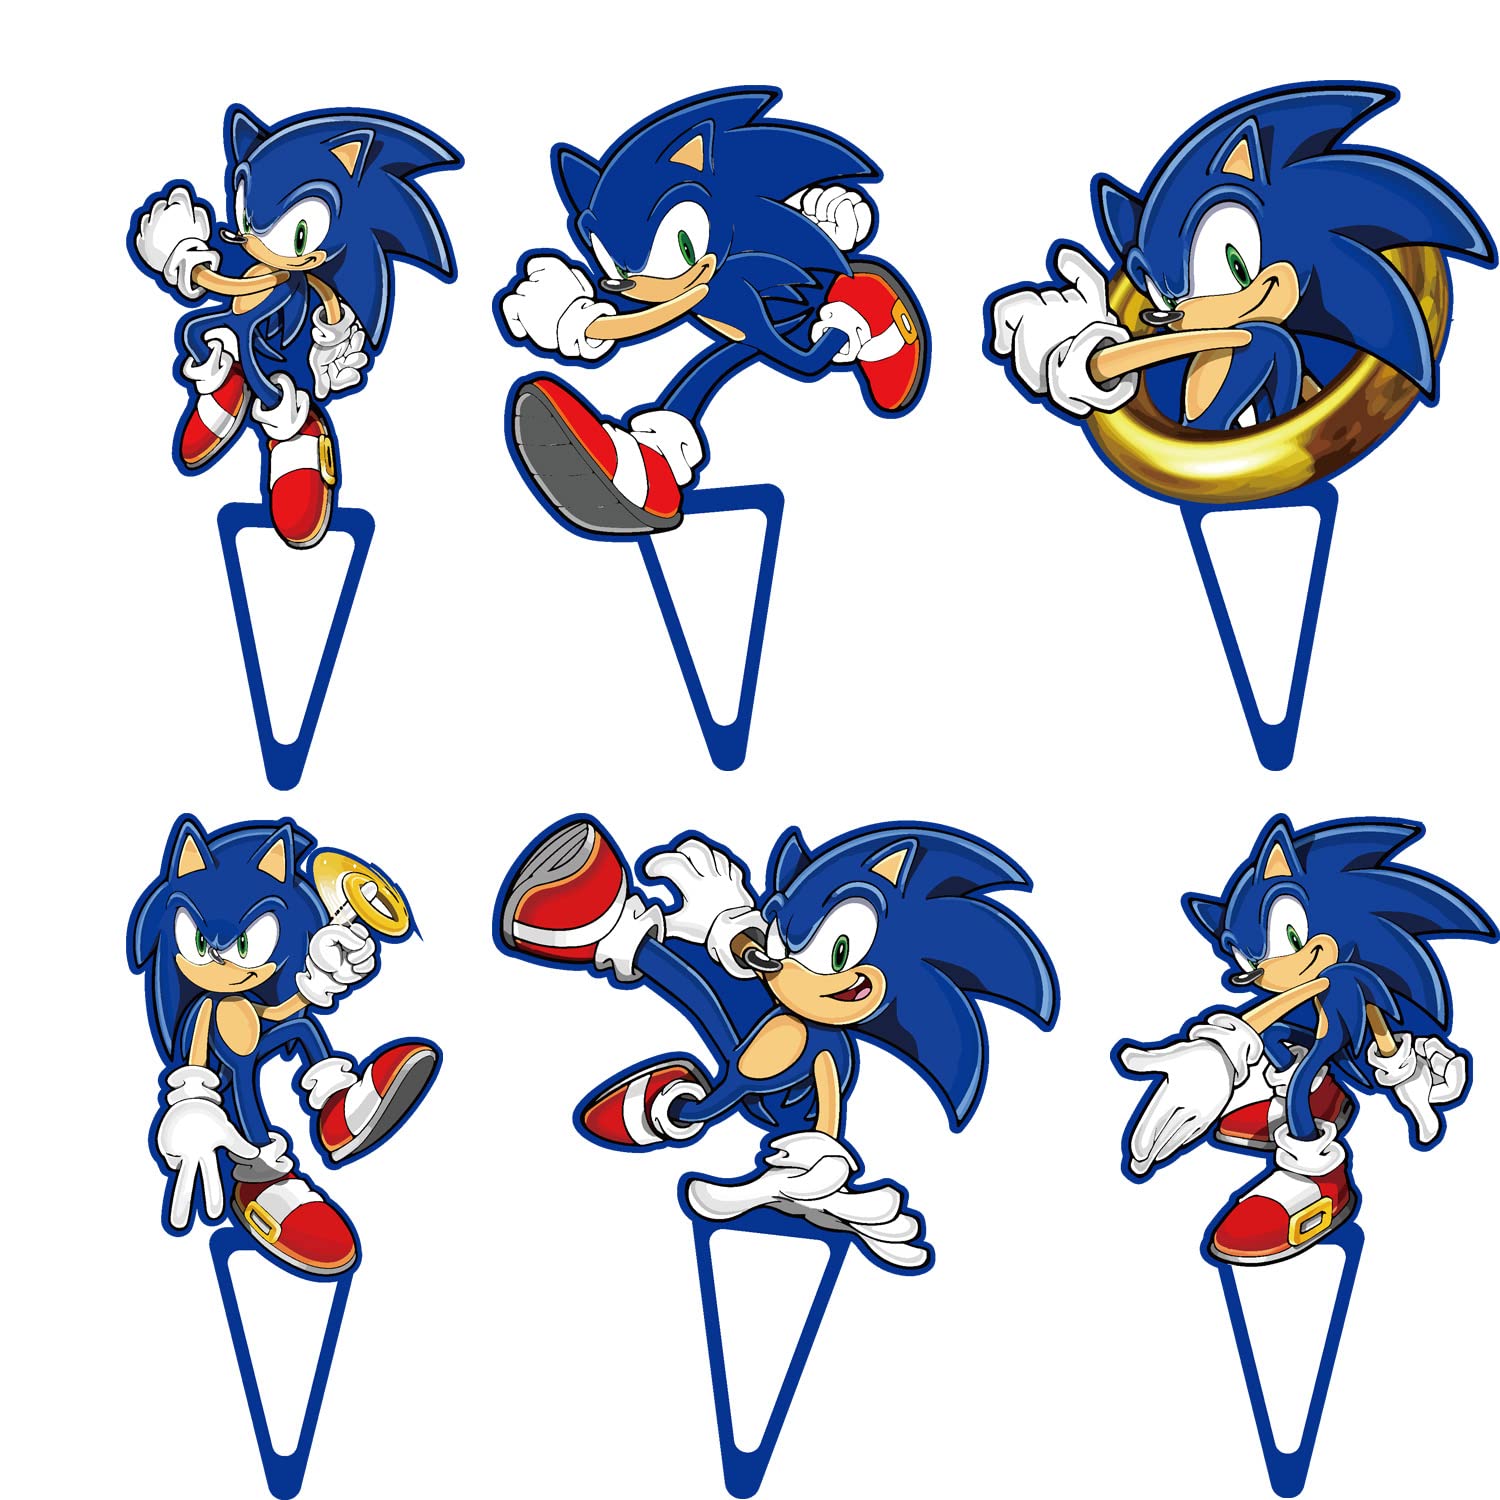 31 Pcs Sonic Cake Topper, Sonic Cupcake Toppers Set, Blue Hedgehog